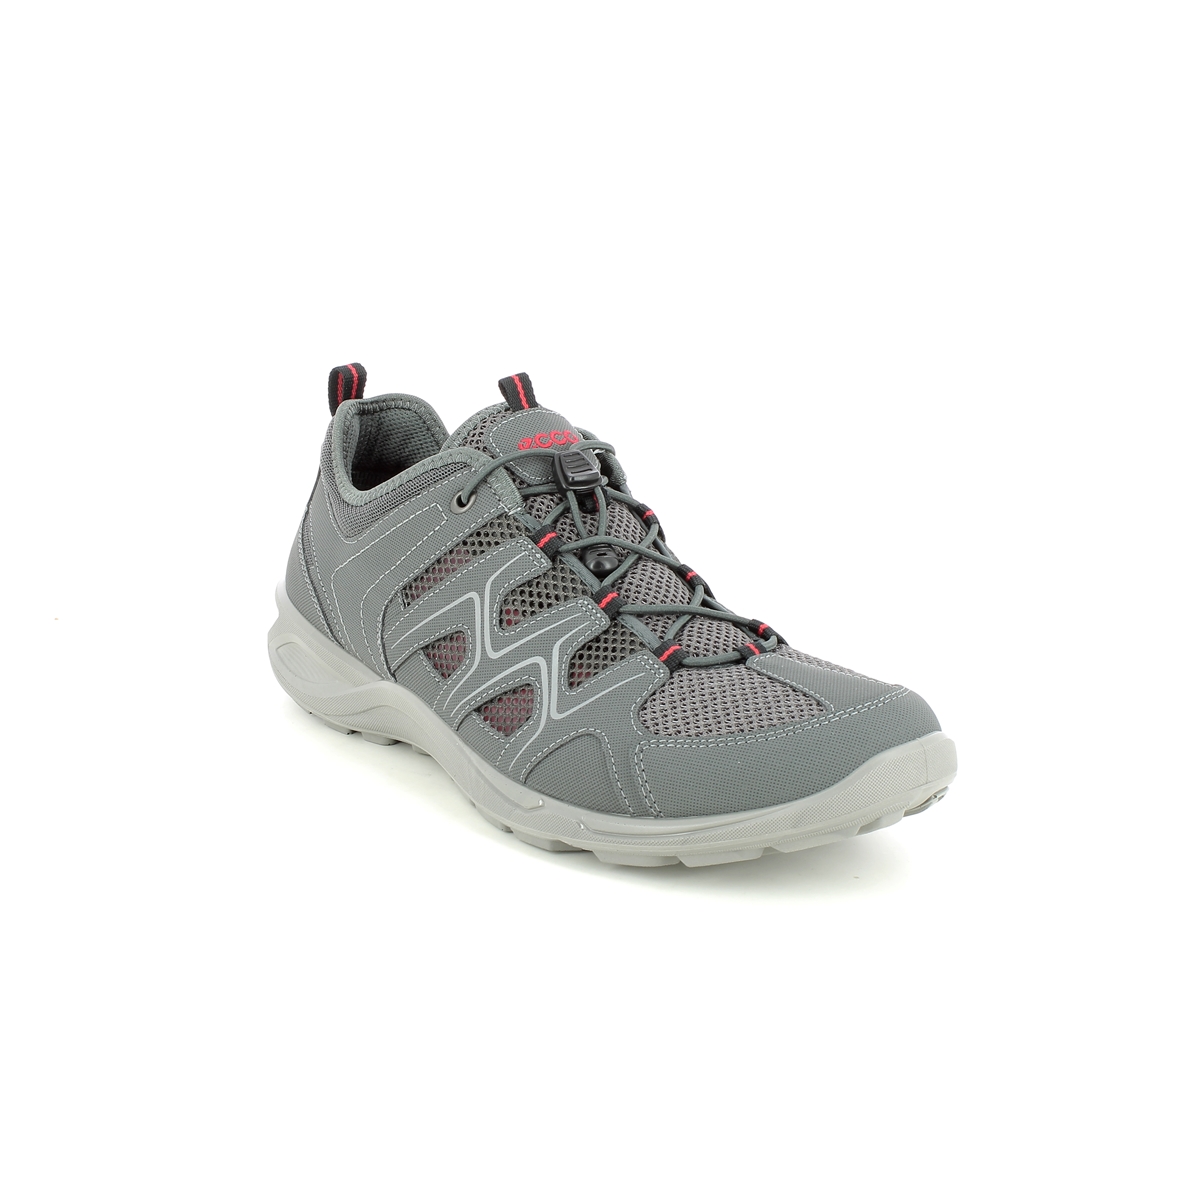 Ecco Terracruise Lt Grey Mens Trainers 825774-56586 In Size 42 In Plain Grey